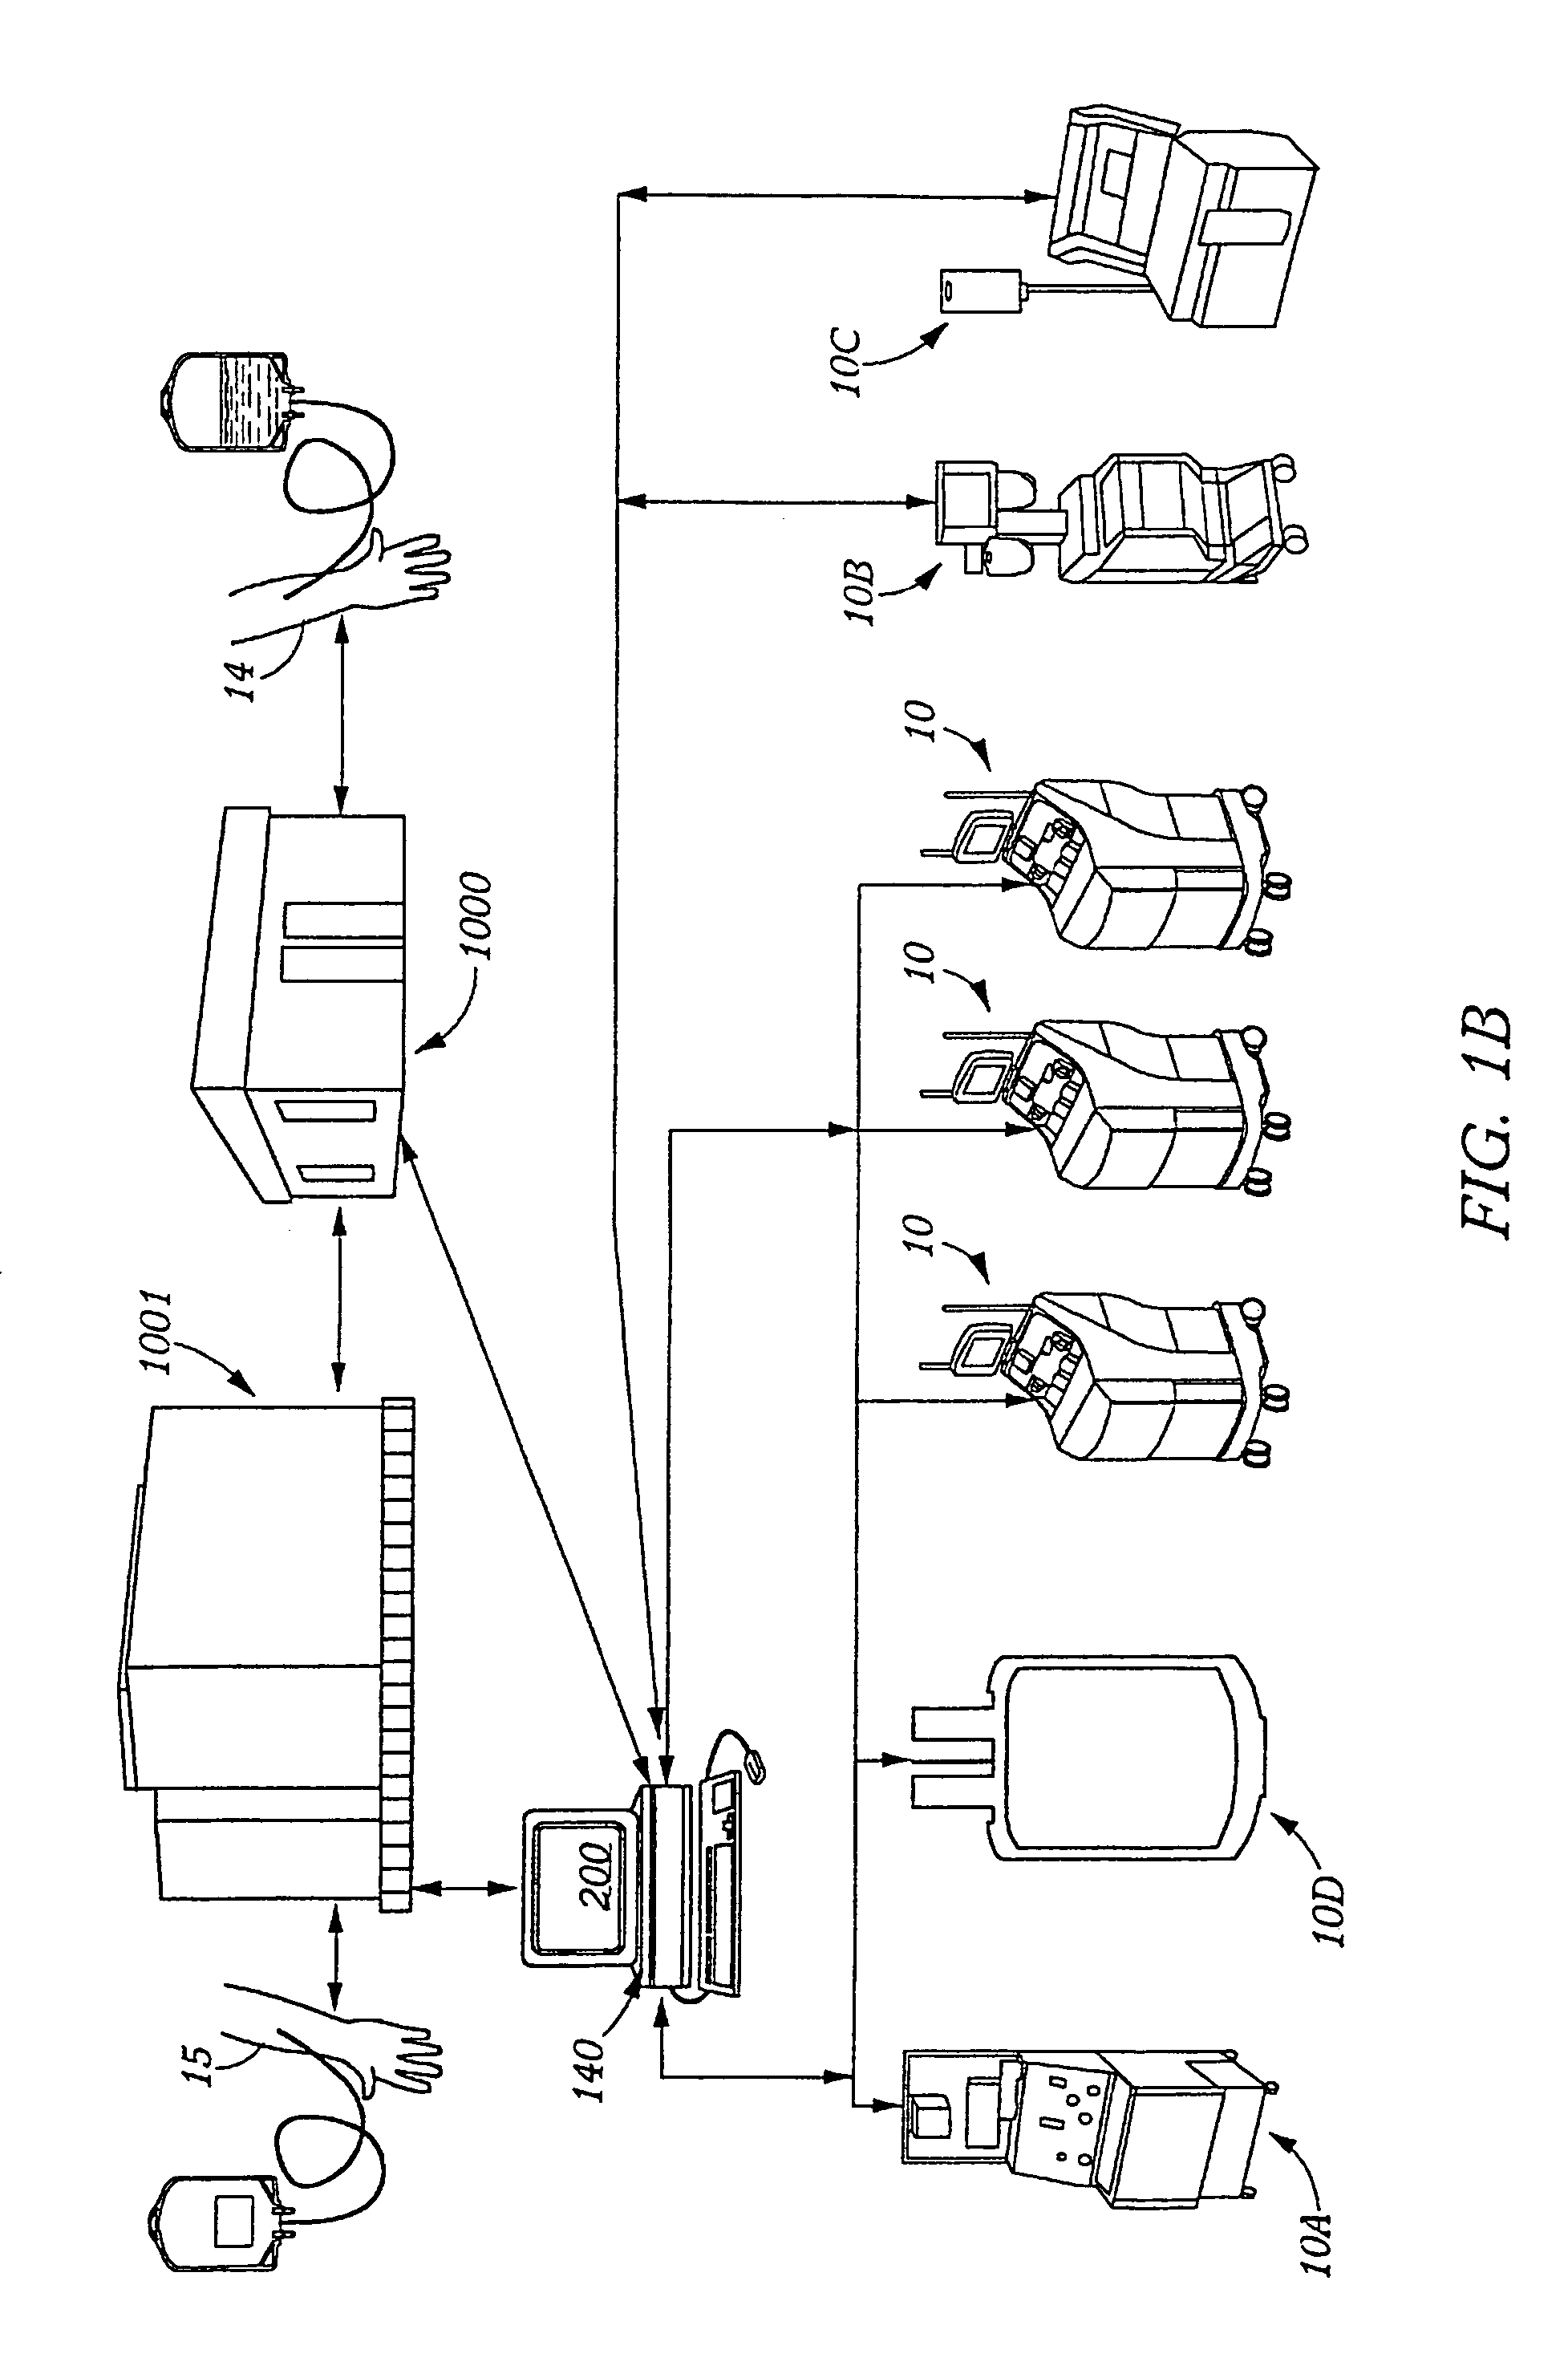 Blood processing information system with blood loss equivalency tracking